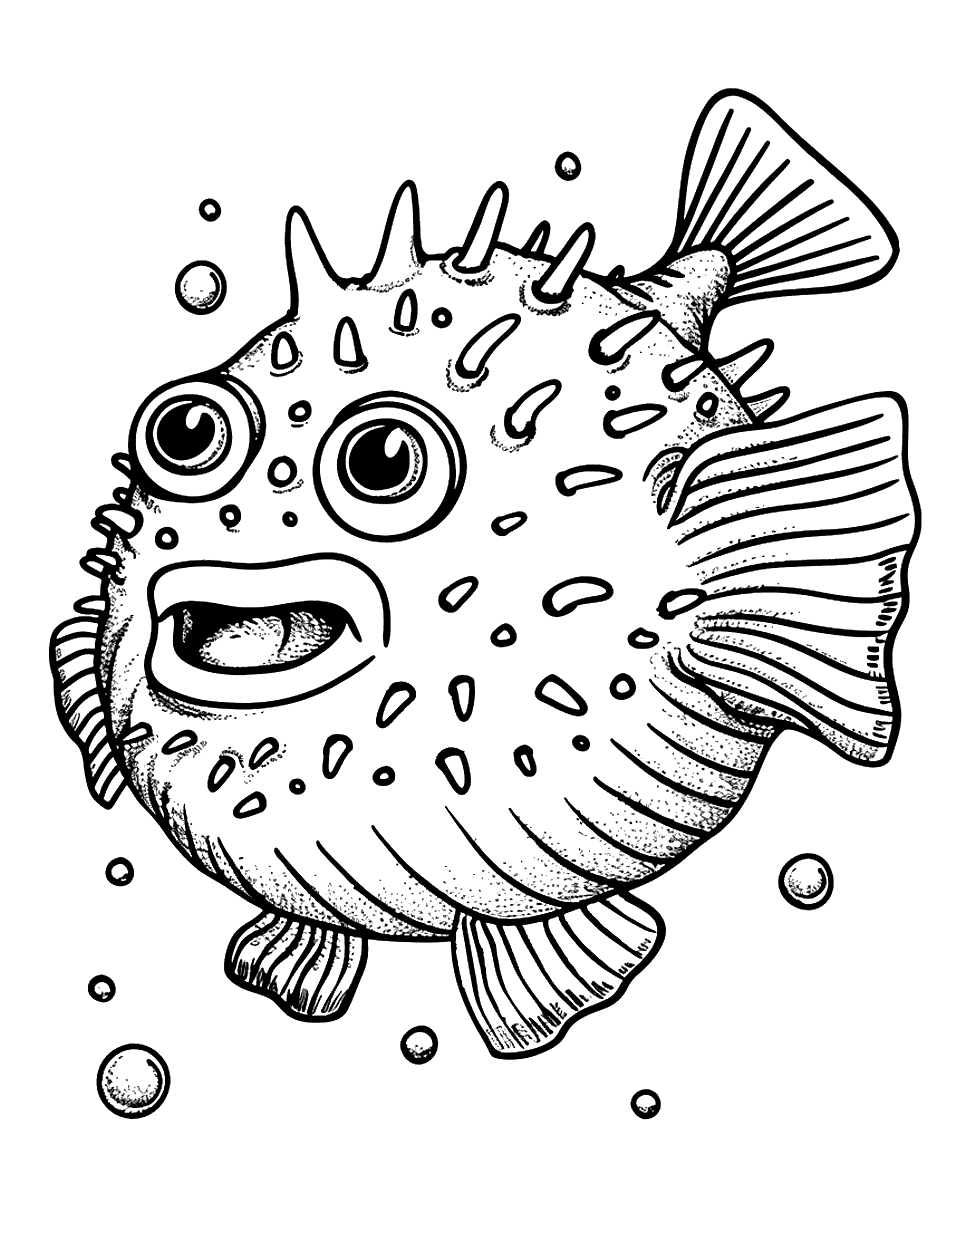 Pufferfish Puffing Up Sea Creature Coloring Page - A startled pufferfish expands, showcasing its spiky appearance in self-defense.